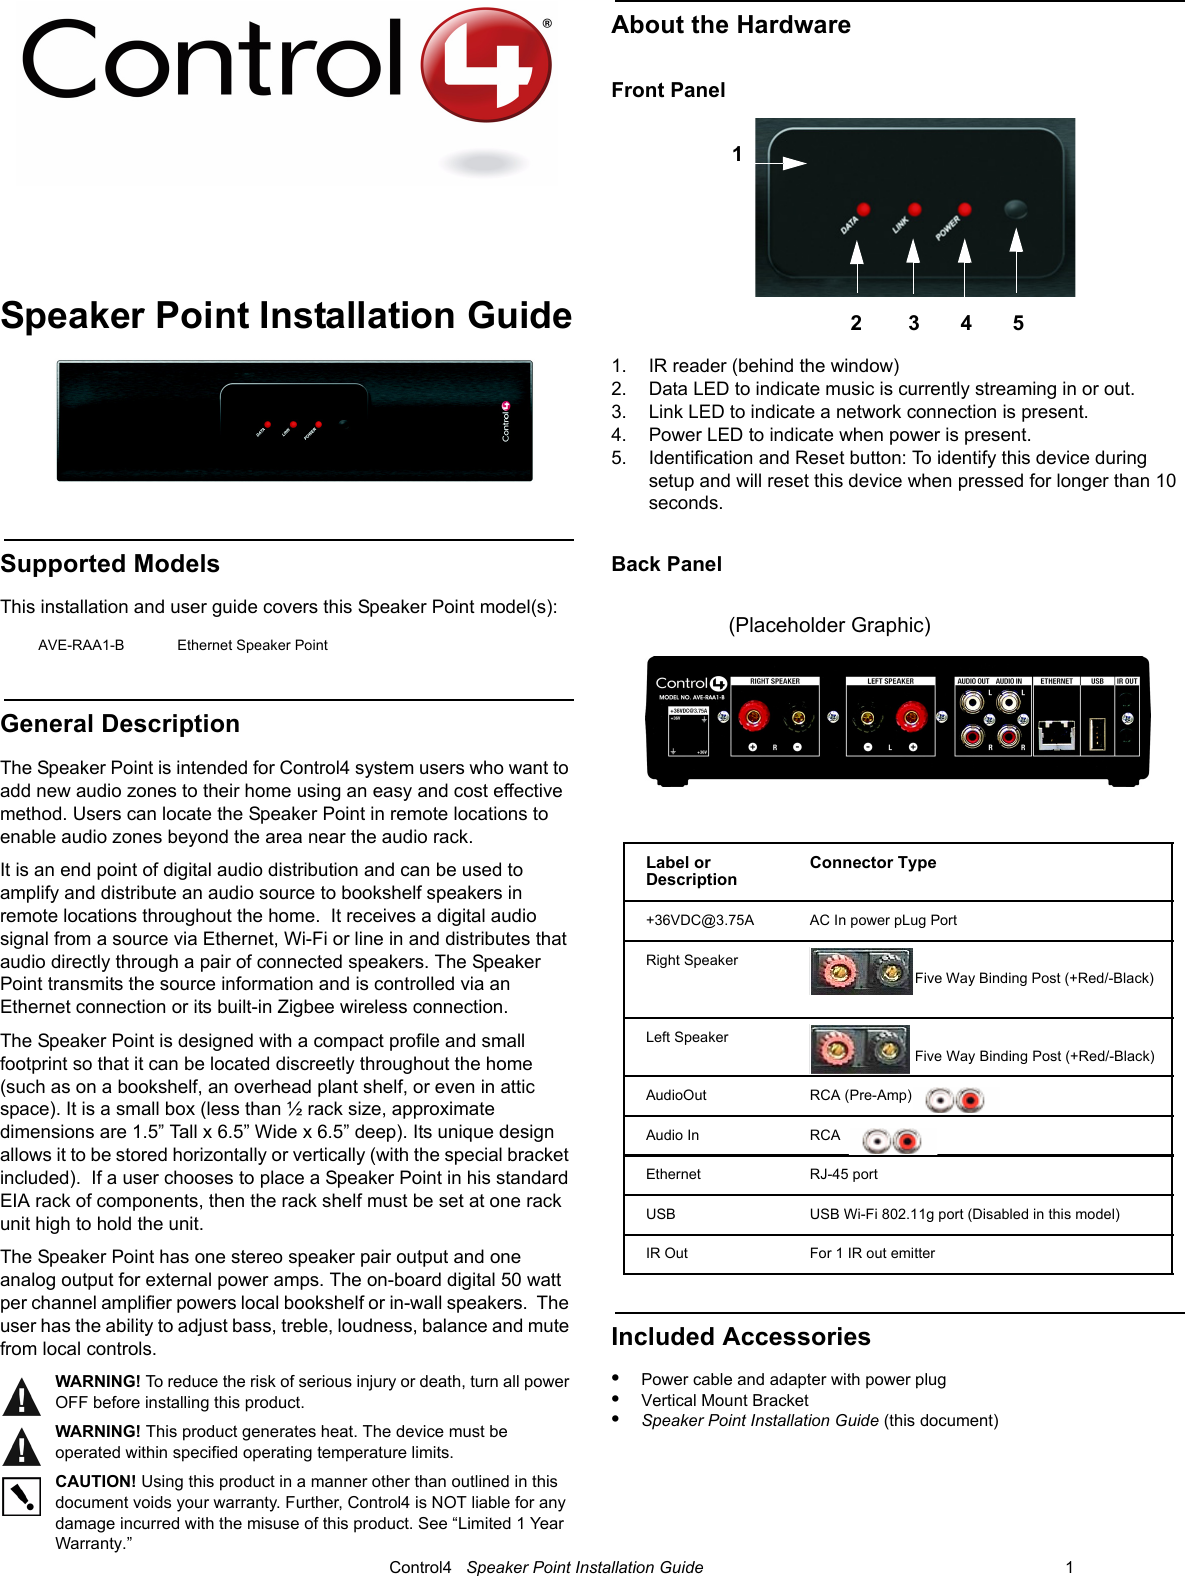                                                                                                                                      Control4   Speaker Point Installation Guide                                                                              1 Speaker Point Installation GuideSupported Models This installation and user guide covers this Speaker Point model(s):General DescriptionThe Speaker Point is intended for Control4 system users who want to add new audio zones to their home using an easy and cost effective method. Users can locate the Speaker Point in remote locations to enable audio zones beyond the area near the audio rack.  It is an end point of digital audio distribution and can be used to amplify and distribute an audio source to bookshelf speakers in remote locations throughout the home.  It receives a digital audio signal from a source via Ethernet, Wi-Fi or line in and distributes that audio directly through a pair of connected speakers. The Speaker Point transmits the source information and is controlled via an Ethernet connection or its built-in Zigbee wireless connection. The Speaker Point is designed with a compact profile and small footprint so that it can be located discreetly throughout the home (such as on a bookshelf, an overhead plant shelf, or even in attic space). It is a small box (less than ½ rack size, approximate dimensions are 1.5” Tall x 6.5” Wide x 6.5” deep). Its unique design allows it to be stored horizontally or vertically (with the special bracket included).  If a user chooses to place a Speaker Point in his standard EIA rack of components, then the rack shelf must be set at one rack unit high to hold the unit.  The Speaker Point has one stereo speaker pair output and one analog output for external power amps. The on-board digital 50 watt per channel amplifier powers local bookshelf or in-wall speakers.  The user has the ability to adjust bass, treble, loudness, balance and mute from local controls.  WARNING! To reduce the risk of serious injury or death, turn all power OFF before installing this product. WARNING! This product generates heat. The device must be operated within specified operating temperature limits.CAUTION! Using this product in a manner other than outlined in this document voids your warranty. Further, Control4 is NOT liable for any damage incurred with the misuse of this product. See “Limited 1 Year Warranty.”About the HardwareFront Panel1. IR reader (behind the window)2. Data LED to indicate music is currently streaming in or out.3. Link LED to indicate a network connection is present.4. Power LED to indicate when power is present.5. Identification and Reset button: To identify this device during setup and will reset this device when pressed for longer than 10 seconds.Back PanelIncluded Accessories•Power cable and adapter with power plug•Vertical Mount Bracket•Speaker Point Installation Guide (this document)AVE-RAA1-B Ethernet Speaker PointLabel or DescriptionConnector Type+36VDC@3.75A  AC In power pLug Port Right SpeakerFive Way Binding Post (+Red/-Black) Left SpeakerFive Way Binding Post (+Red/-Black)AudioOut   RCA (Pre-Amp)Audio In   RCA  Ethernet RJ-45 portUSB USB Wi-Fi 802.11g port (Disabled in this model)IR Out For 1 IR out emitter 12        3       4       5 (Placeholder Graphic)